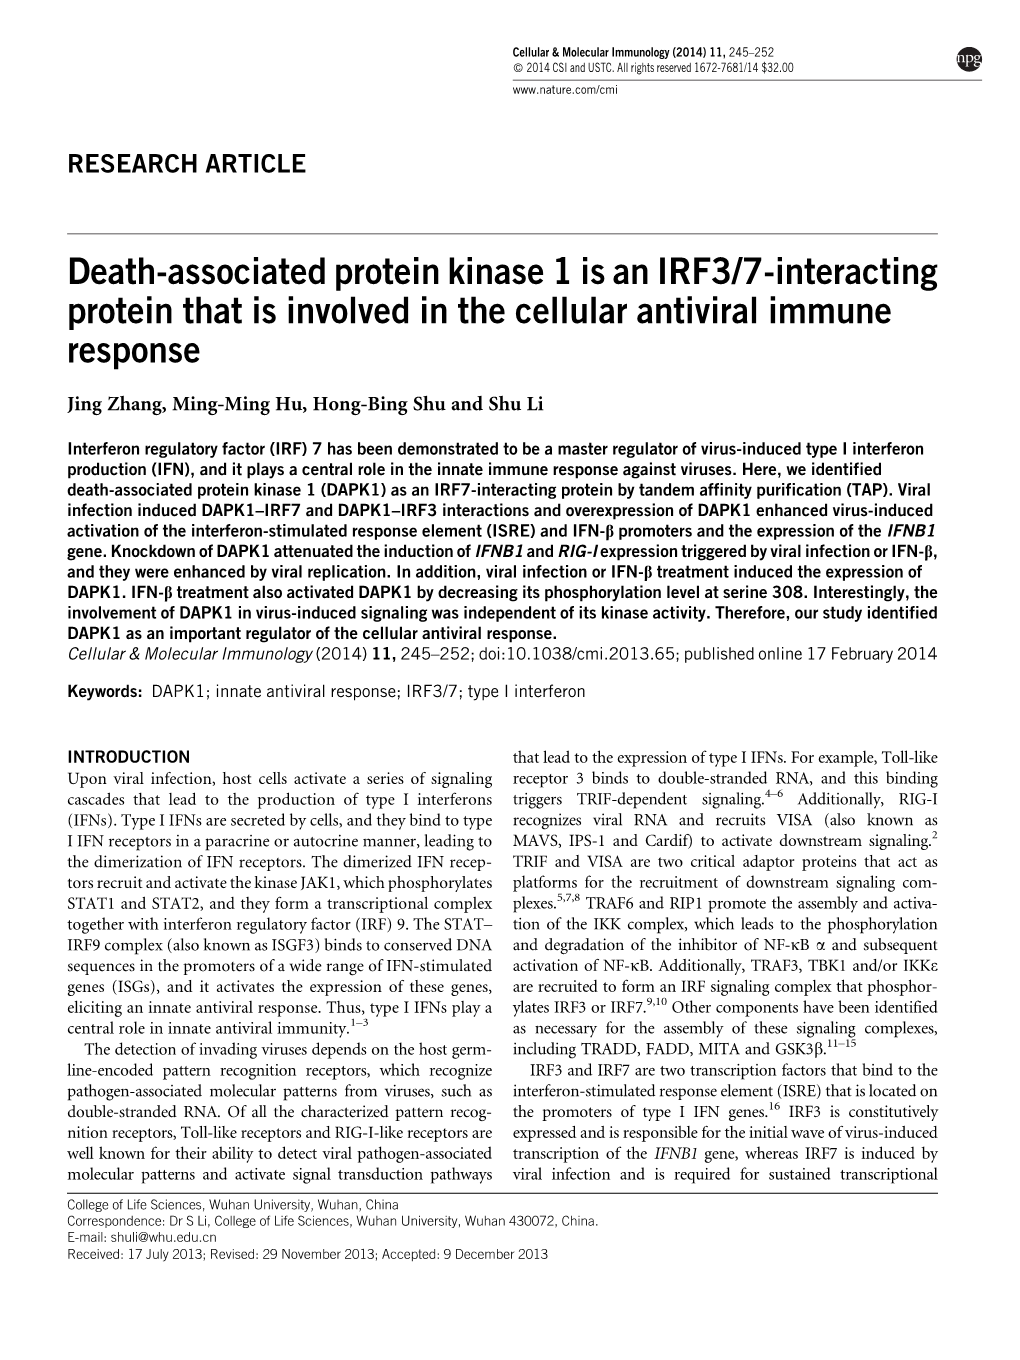 Death-Associated Protein Kinase 1 Is an IRF3/7-Interacting Protein That Is Involved in the Cellular Antiviral Immune Response